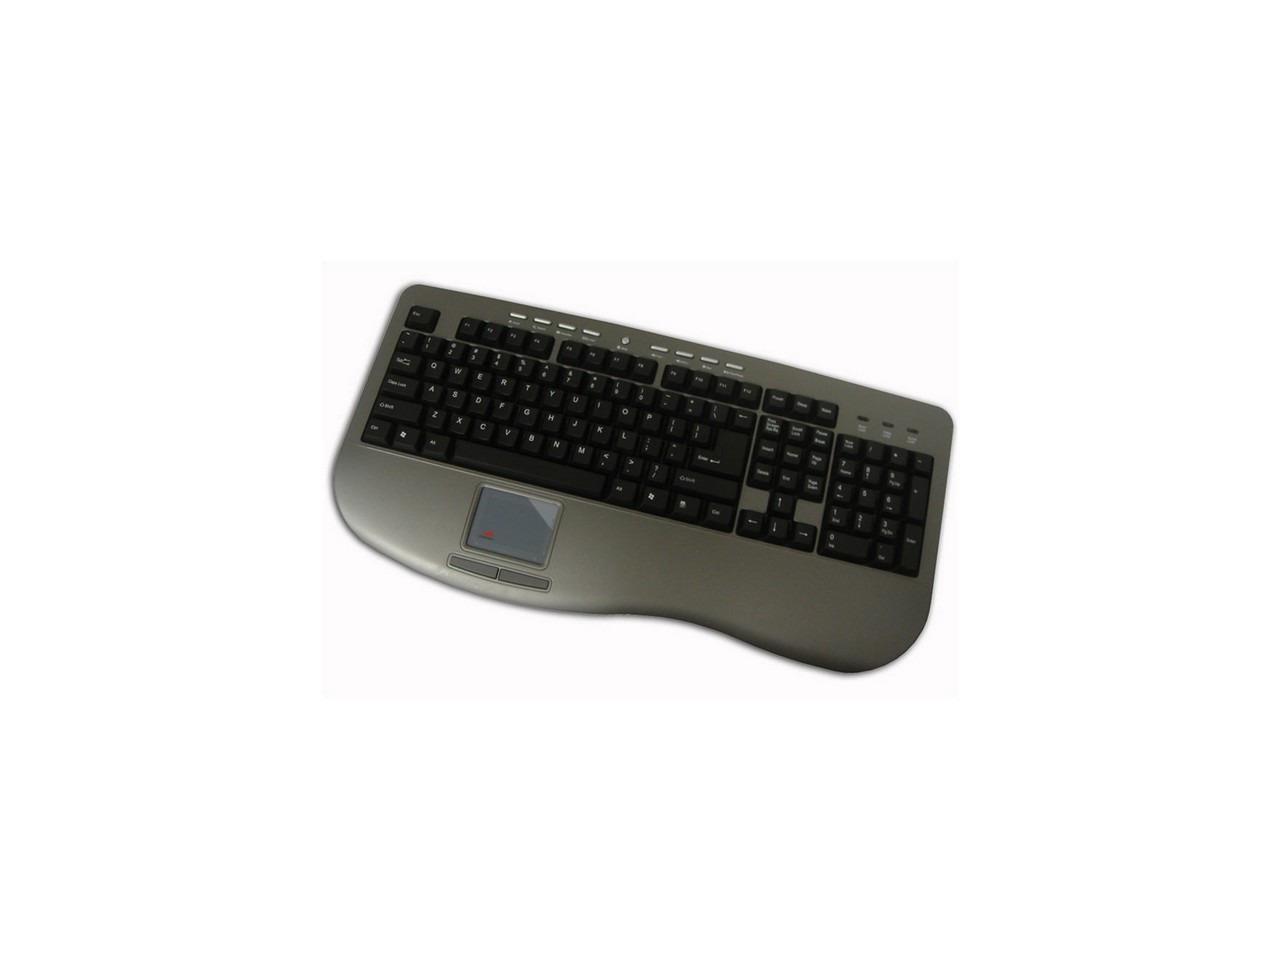 WinTouch full size USB touchpad keyboard - AKB-430UG